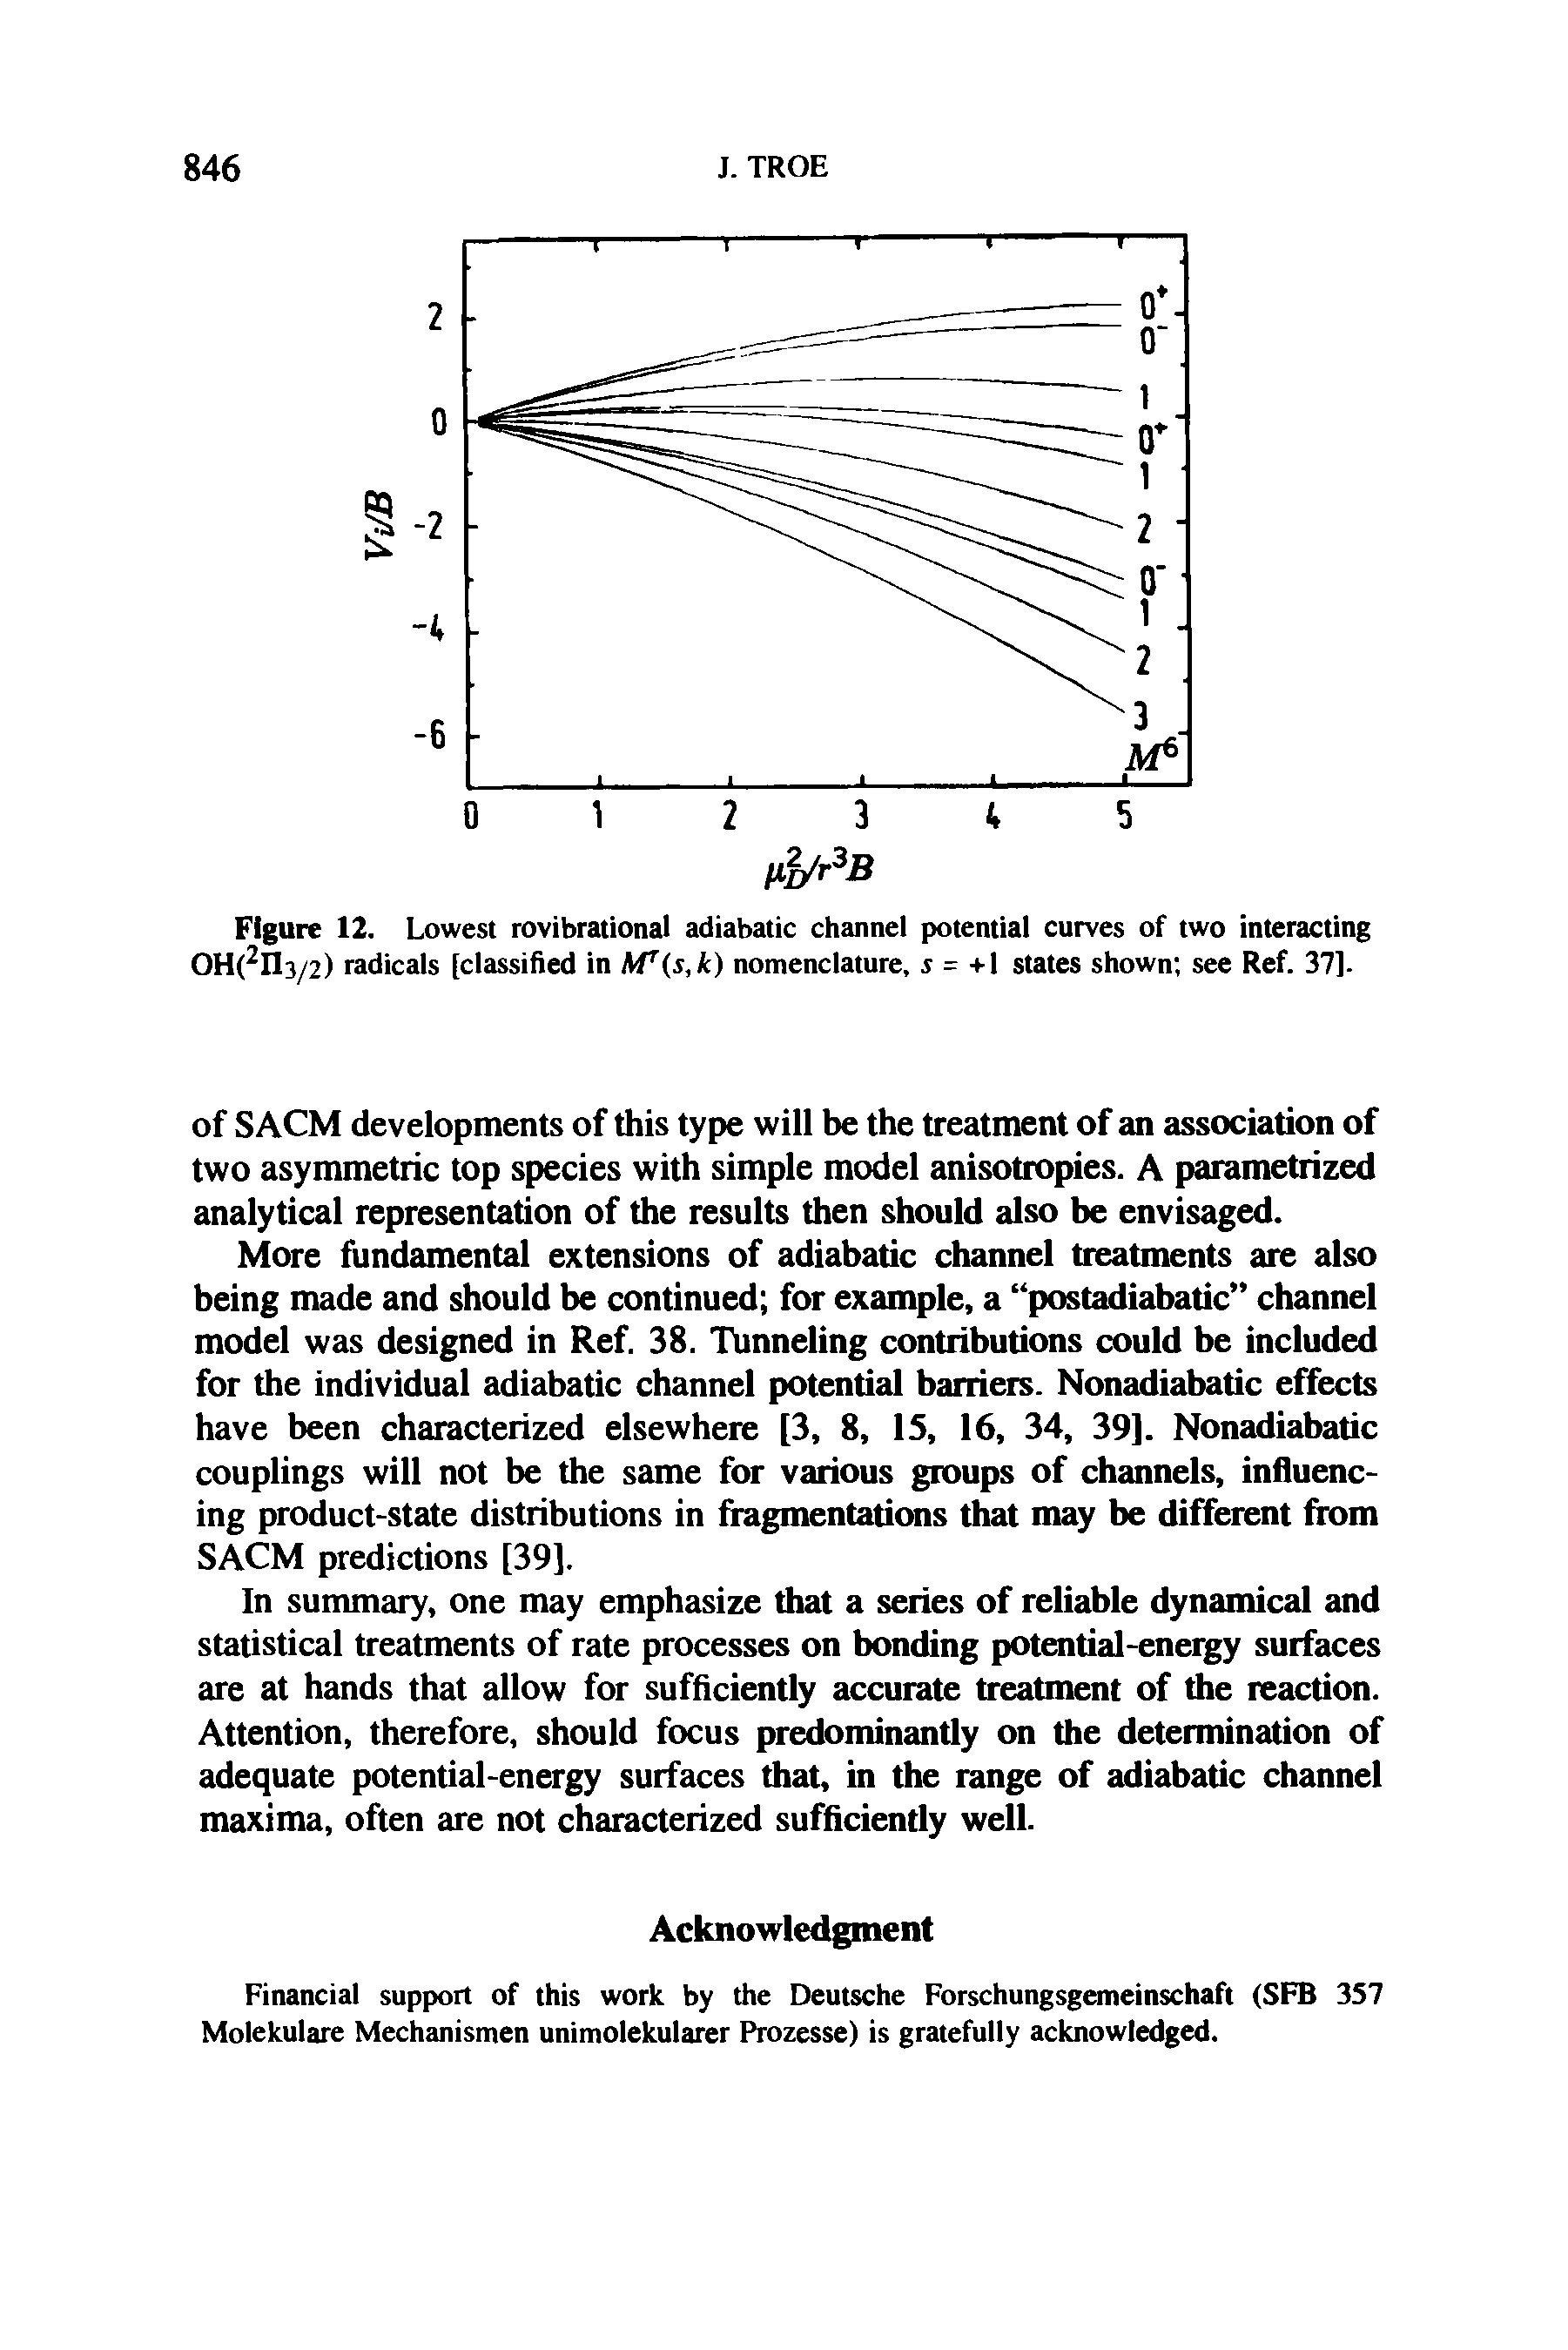 Figure 12. Lowest rovibrational adiabatic channel potential curves of two interacting OH(2Il3/2) radicals [classified in fvTis, k) nomenclature, s = +1 states shown see Ref. 37].